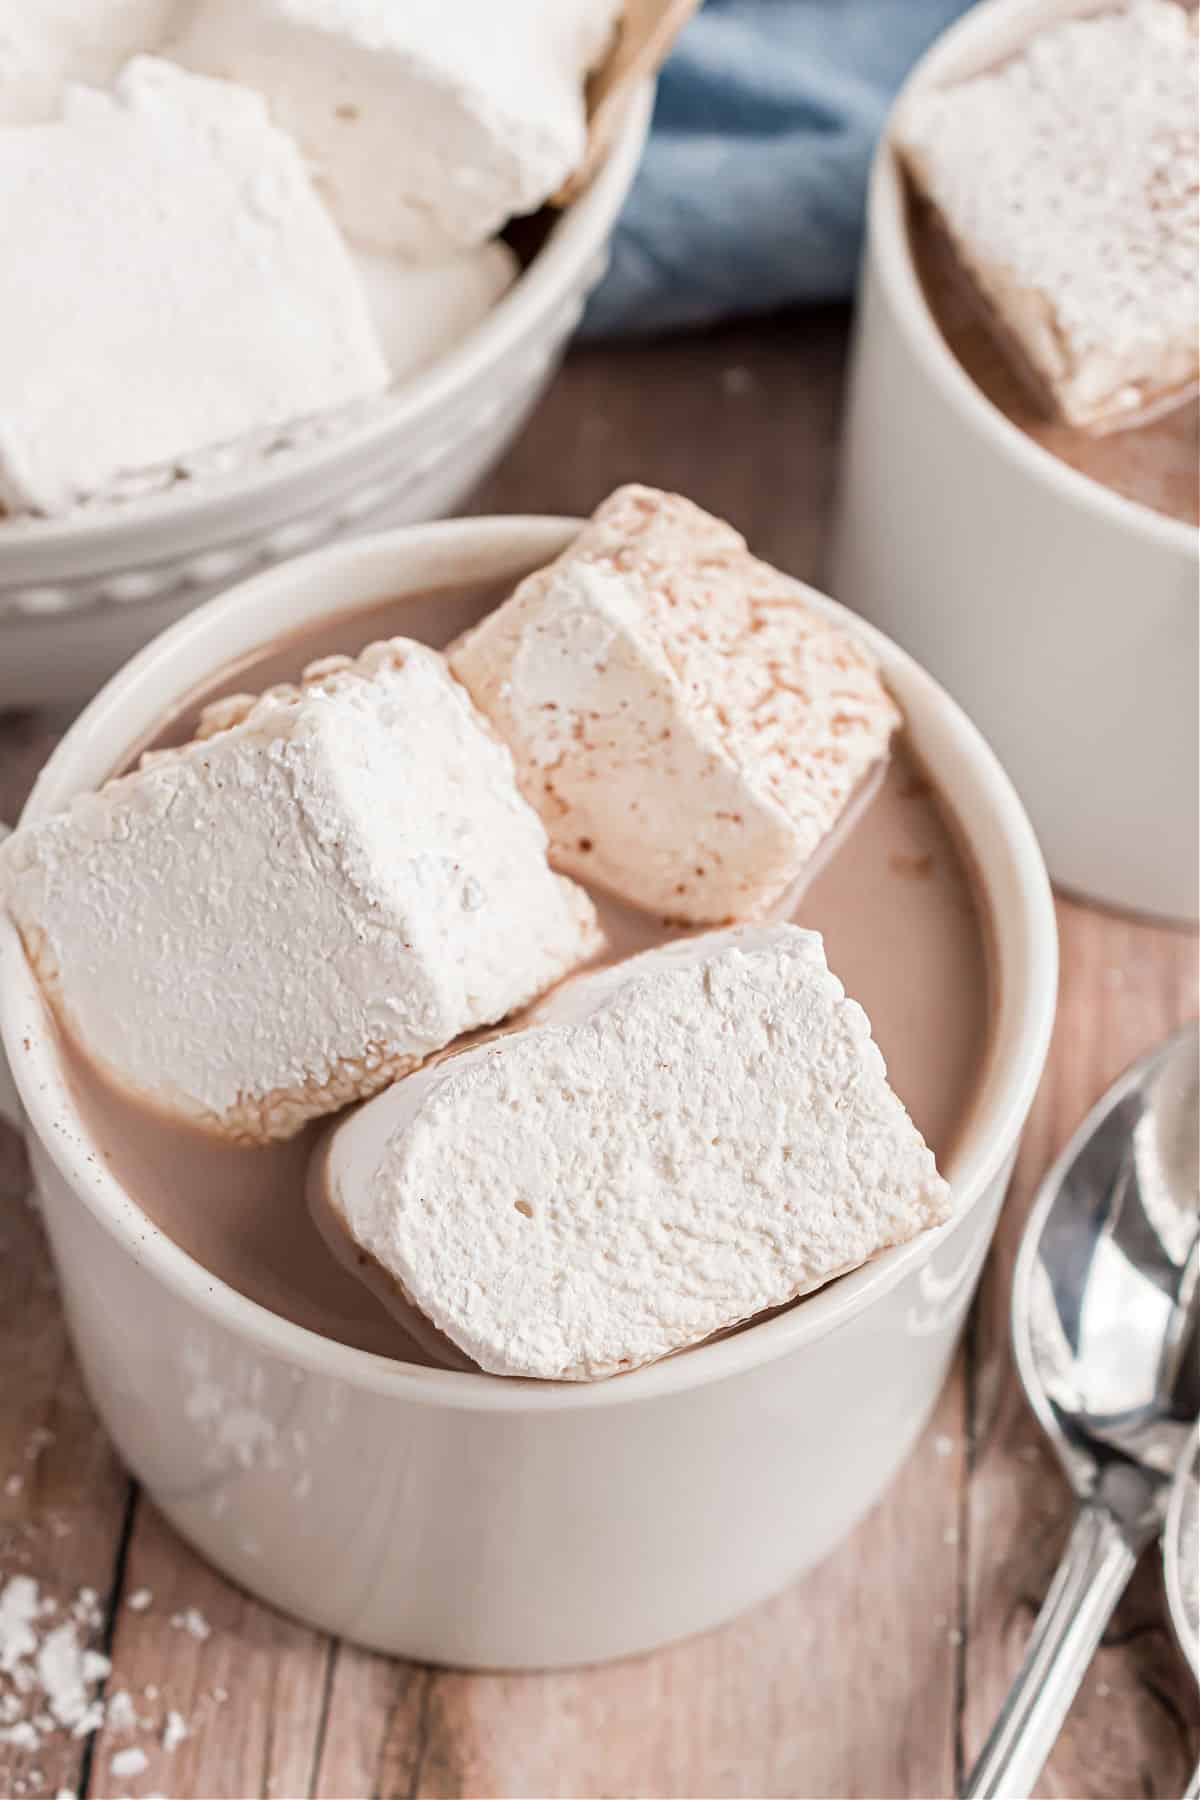 Hot cocoa in a mug with homemade marshmallows on top.